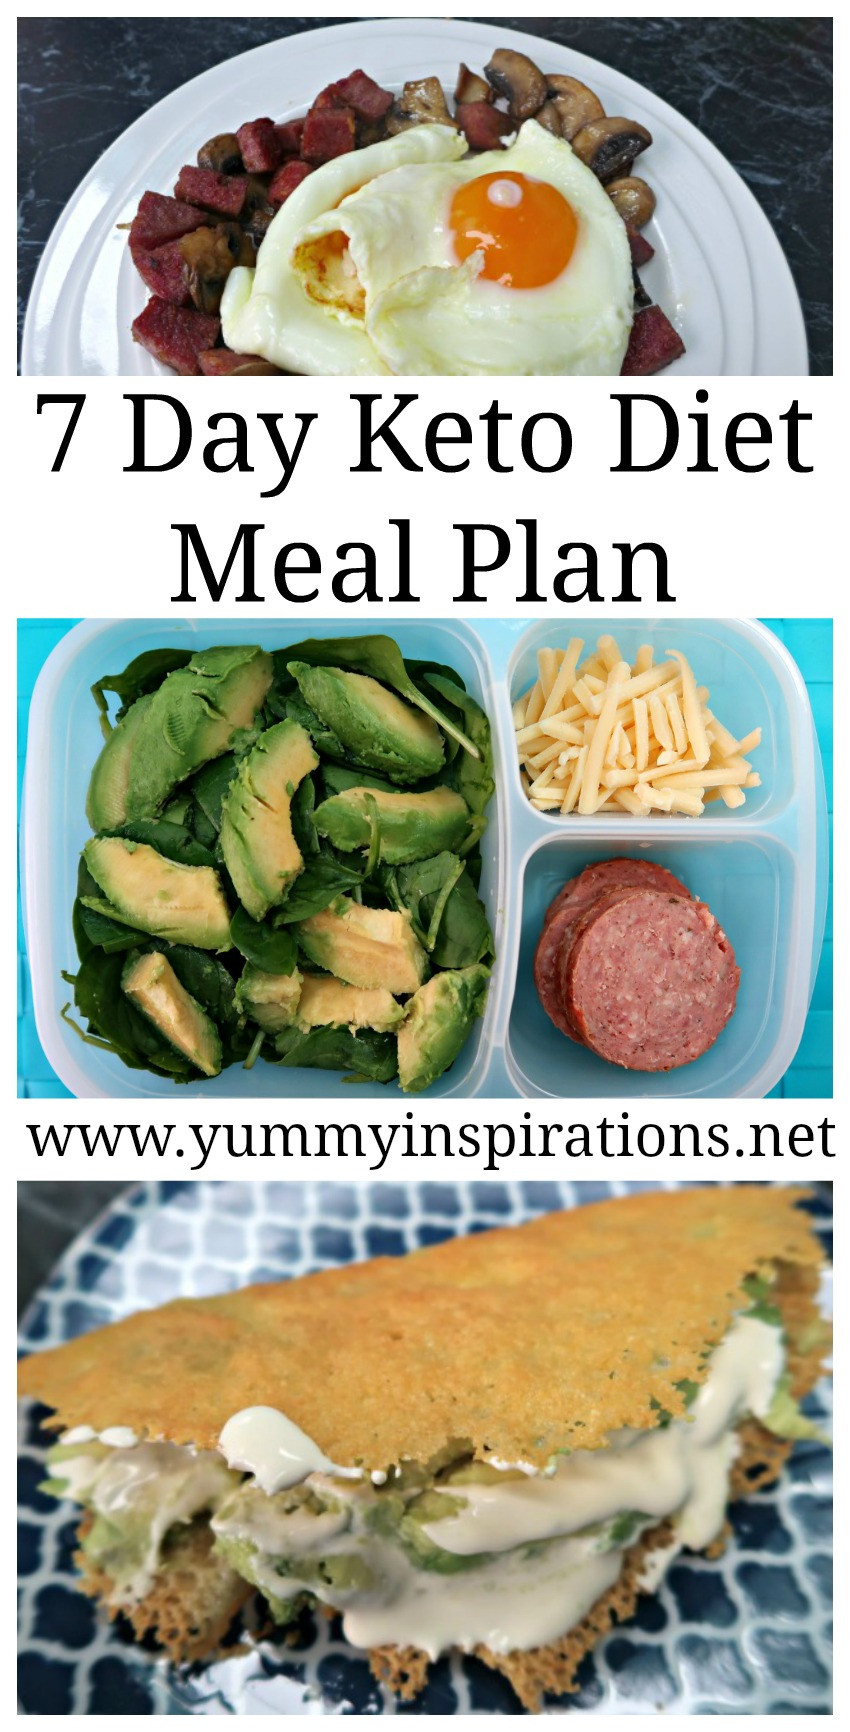 Keto Diet Recipies
 7 Day Keto Diet Meal Plan For Weight Loss Ketogenic Foods